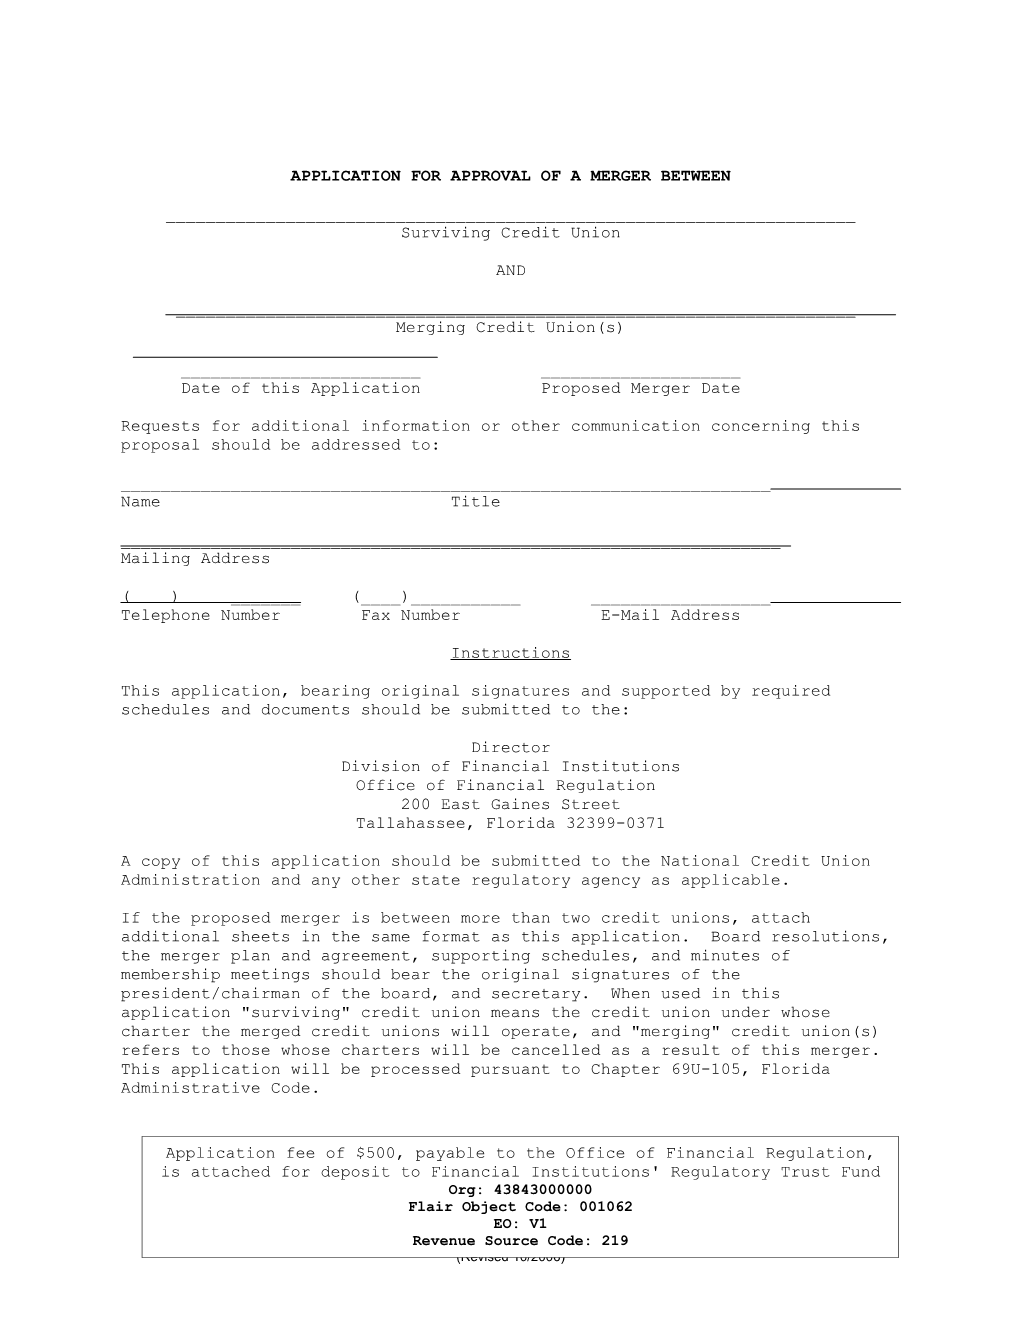 Application for Approval of a Merger Between